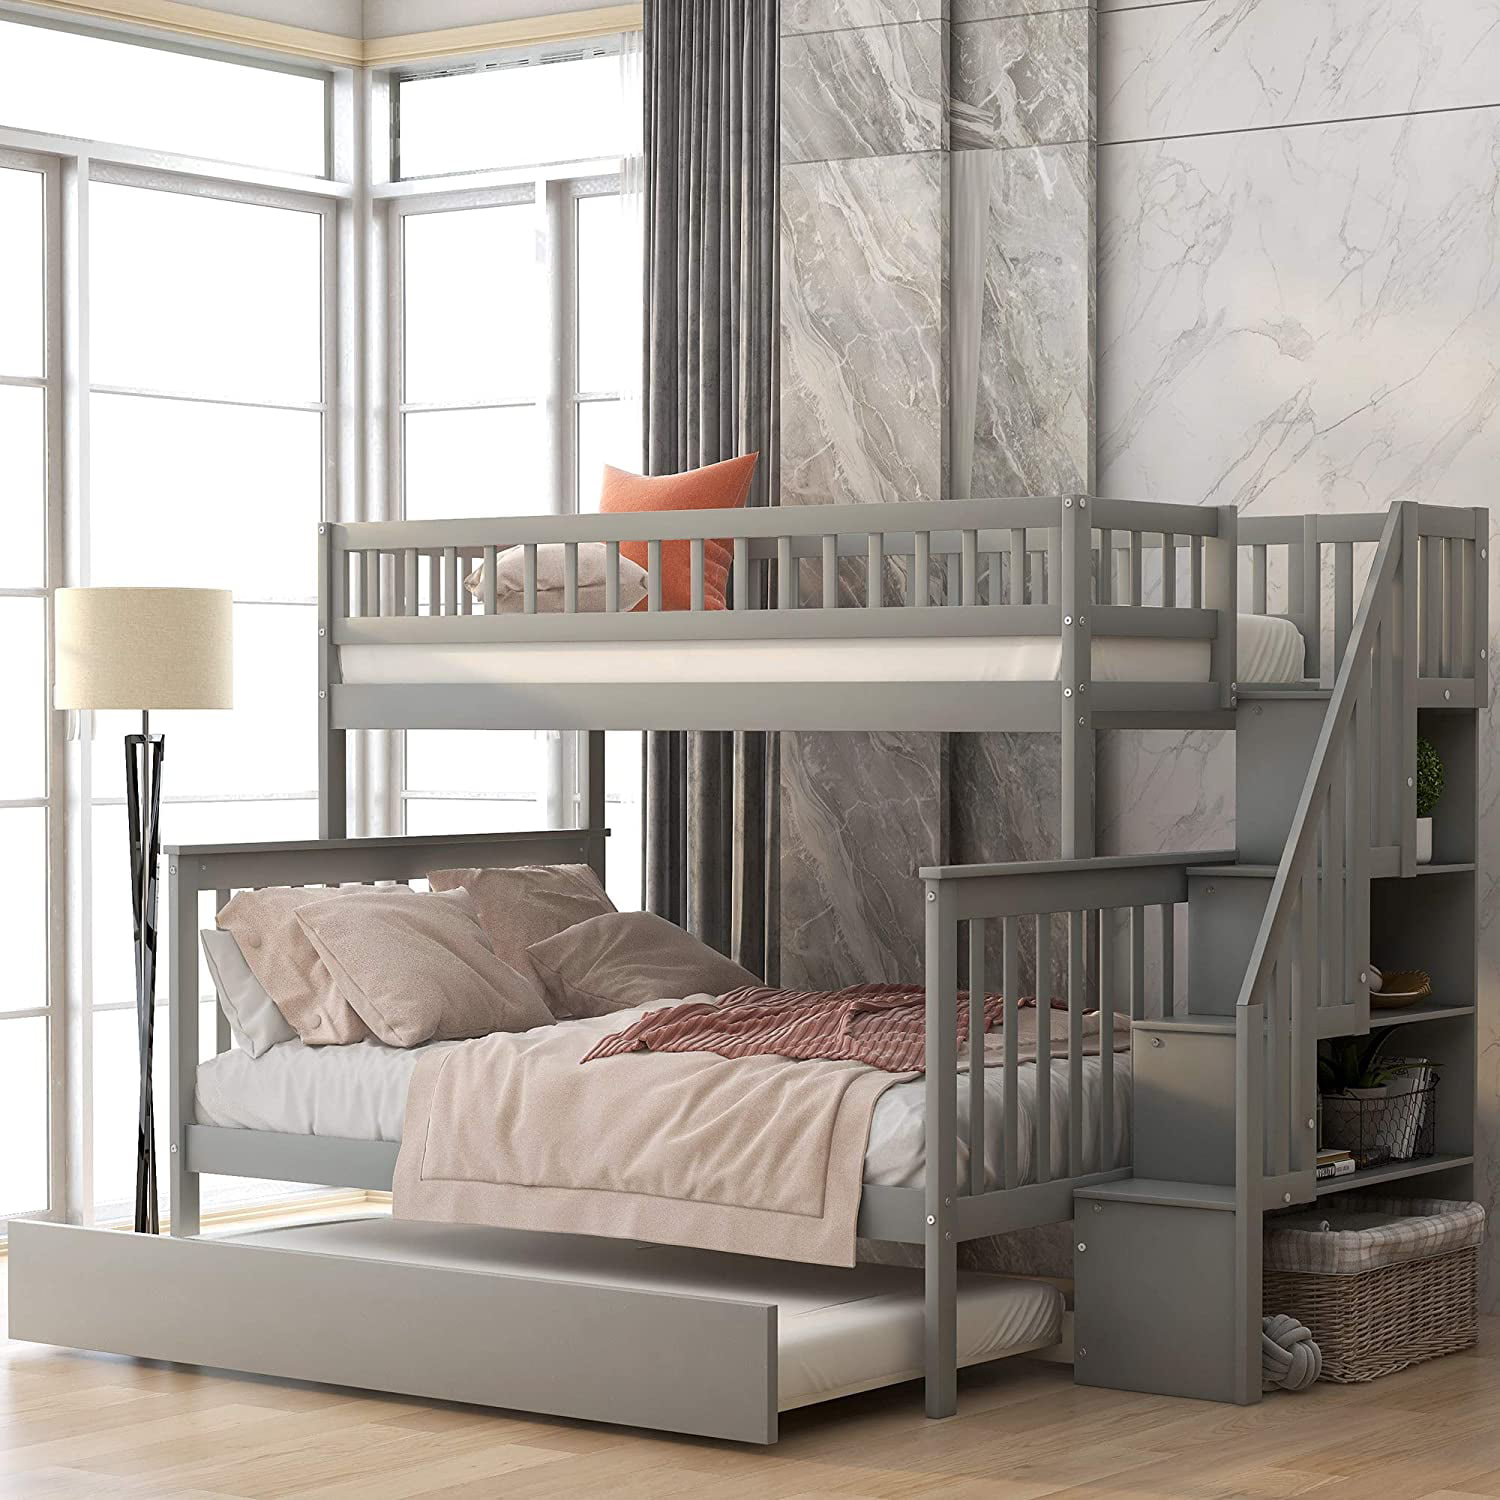 Piscis Bunk Bed Beds Twin Over, Full Size Bunk Beds Wood